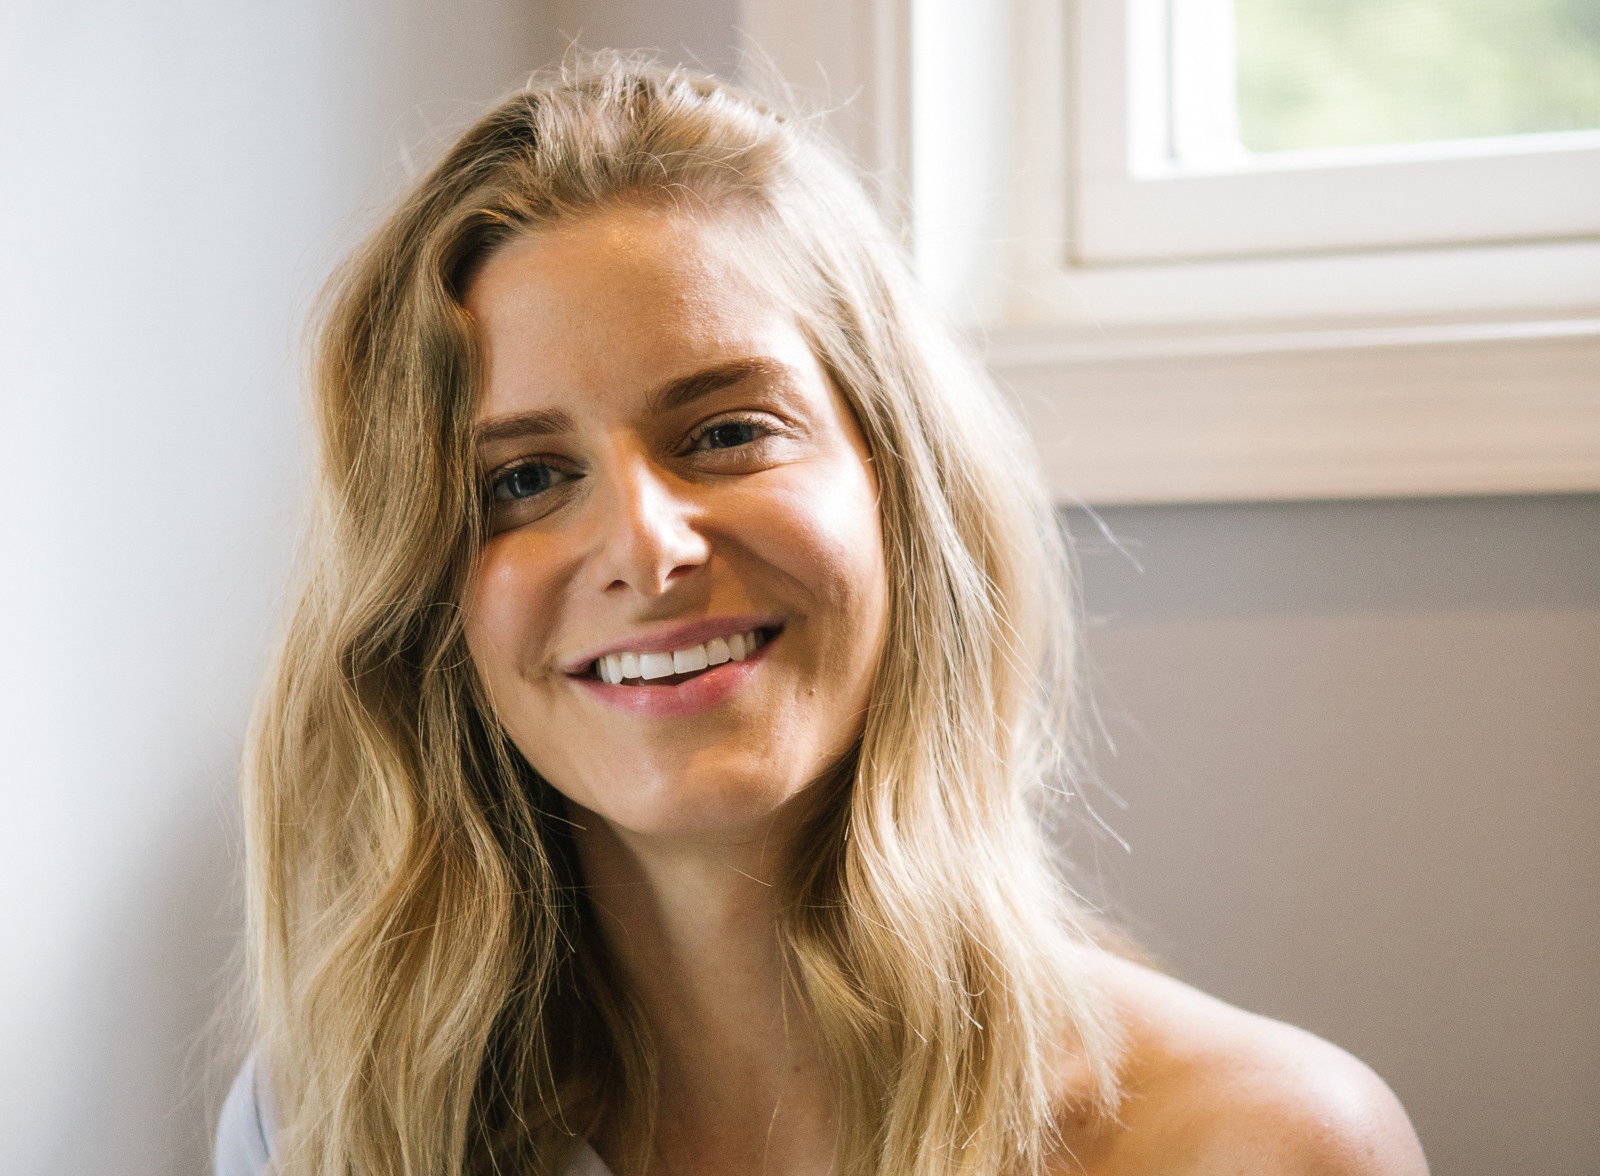 At the age of 24, Stefanie Joho was diagnosed with colon cancer. But she survived, and has released a list of tips for those who are on their own cancer journey. Photo: The Washington Post